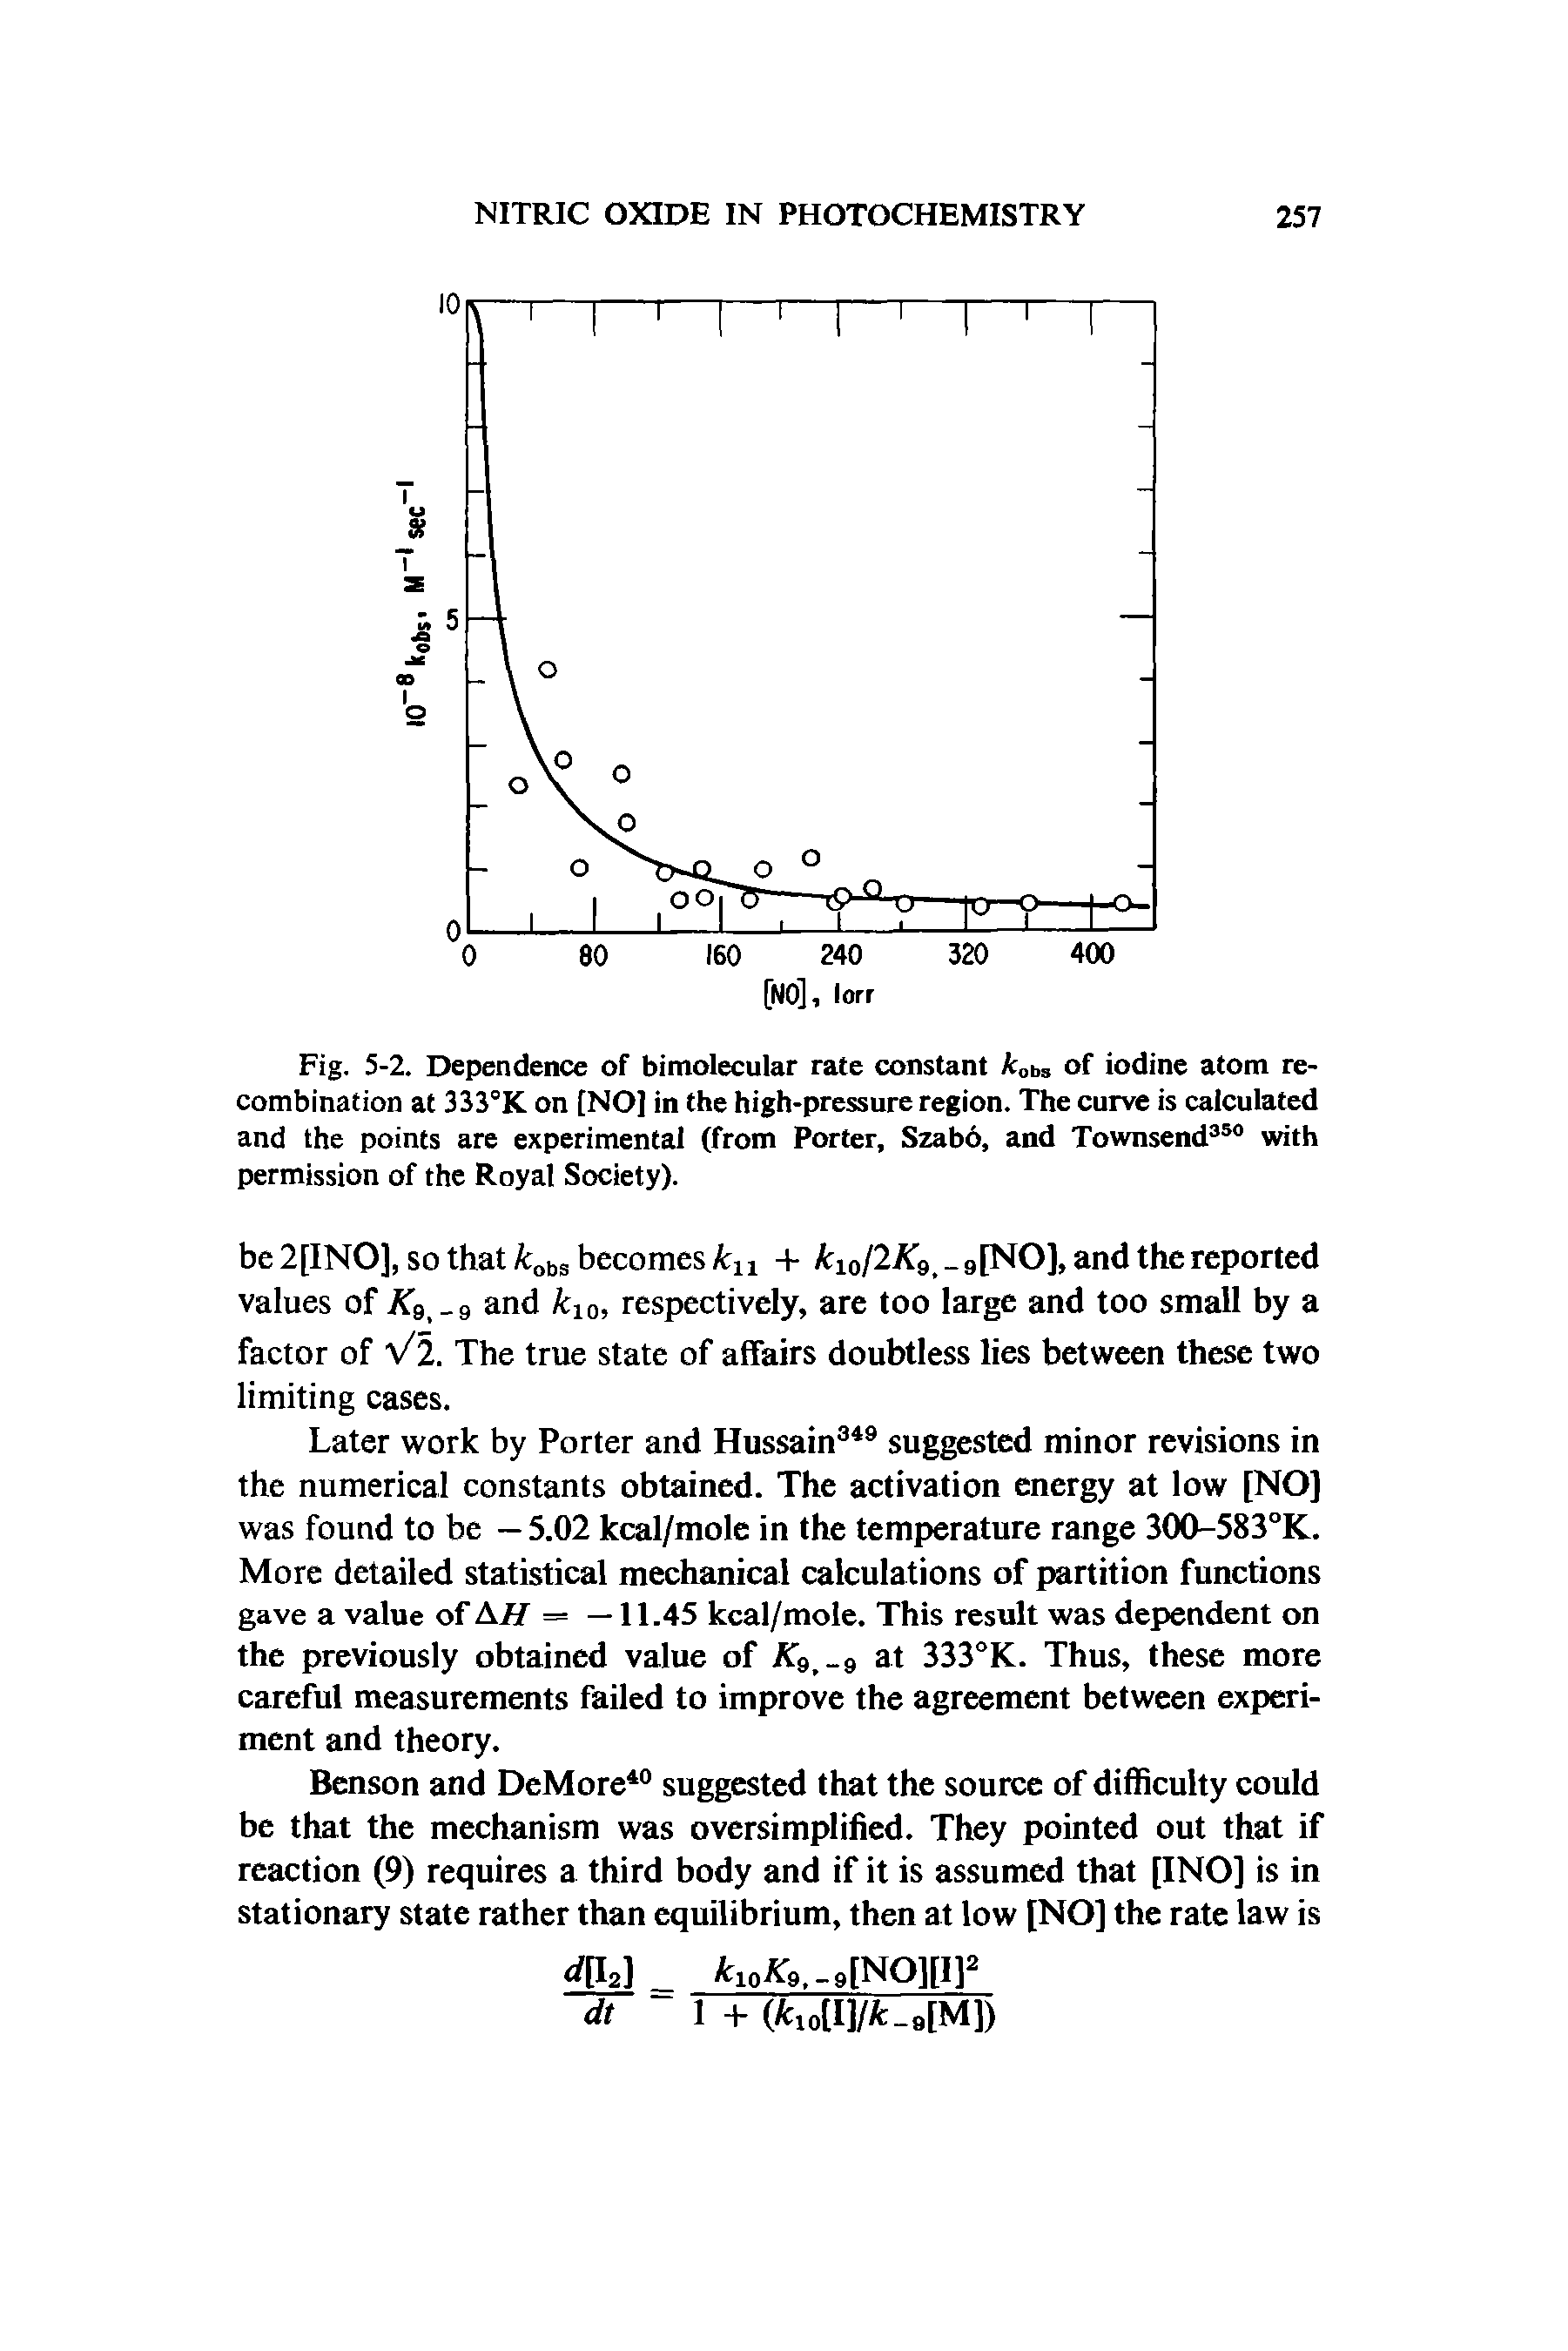 Fig. 5-2. Dependence of bimolecular rate constant kobs of iodine atom recombination at 333°K on [NO] in the high-pressure region. The curve is calculated and the points are experimental (from Porter, Szab6, and Townsend350 with permission of the Royal Society).